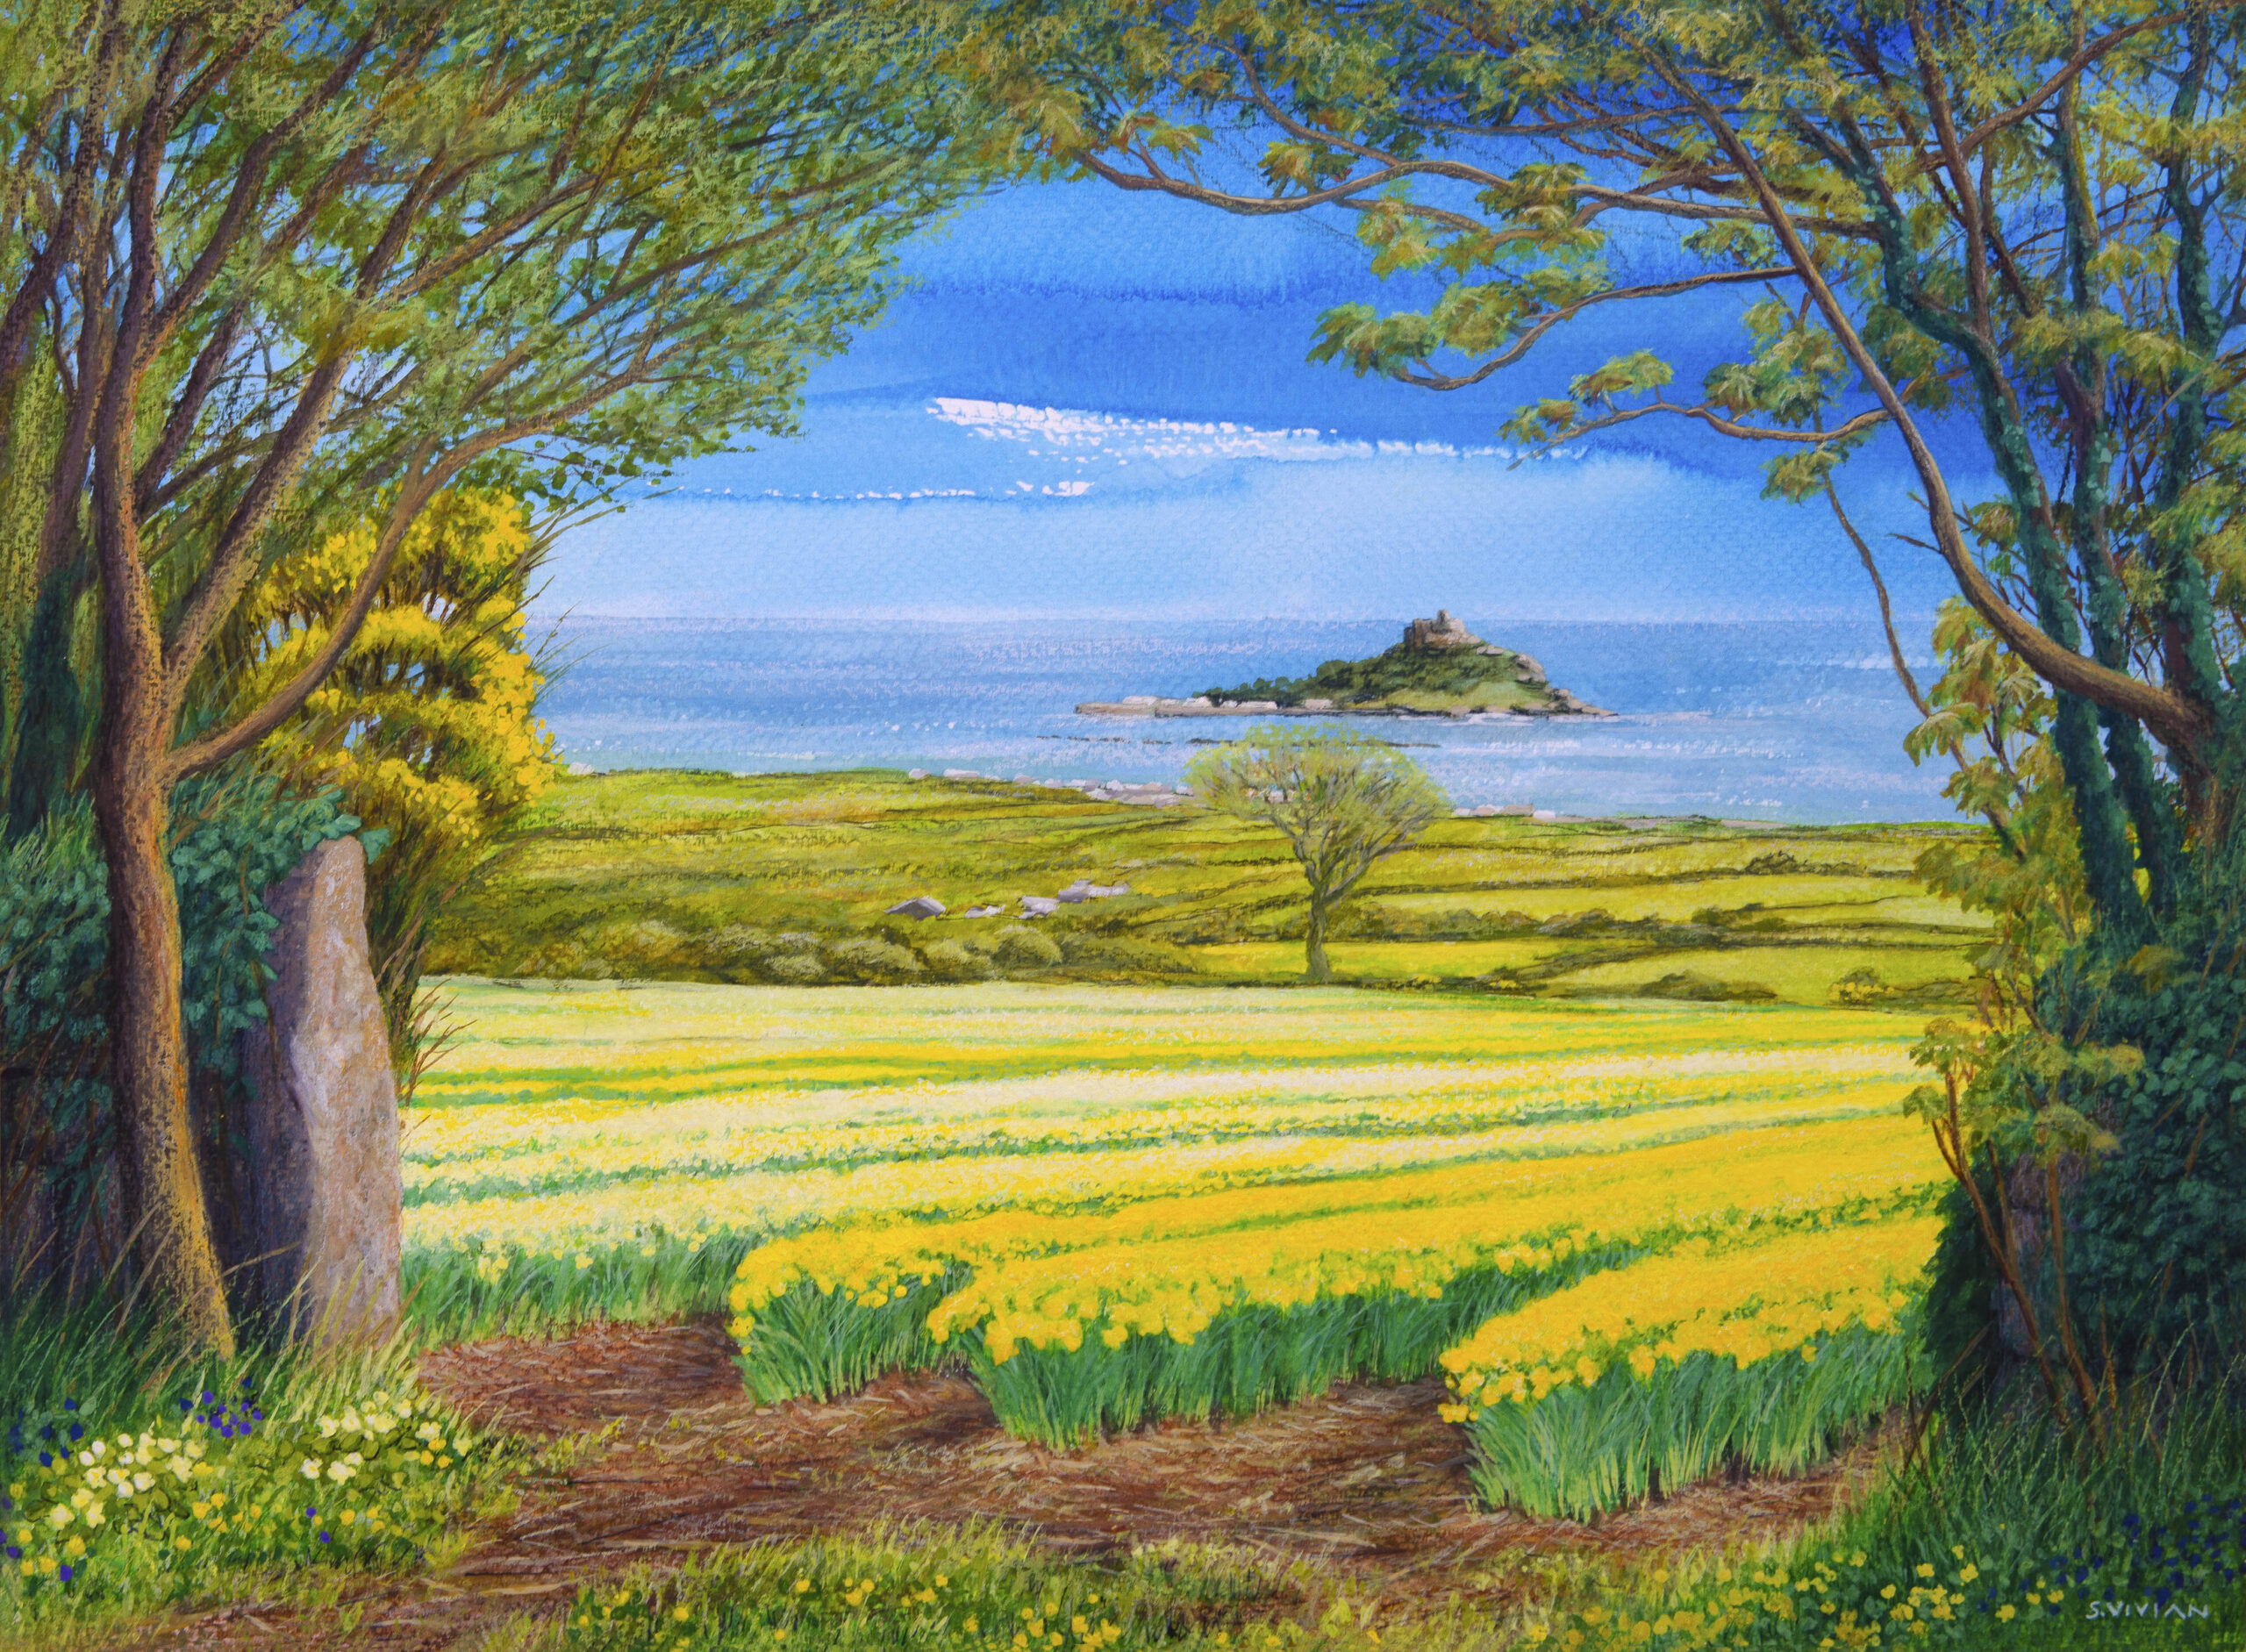 Mixed Media Painting by Sarah Vivian, St Michael's Mount with daffodils, Cornwall